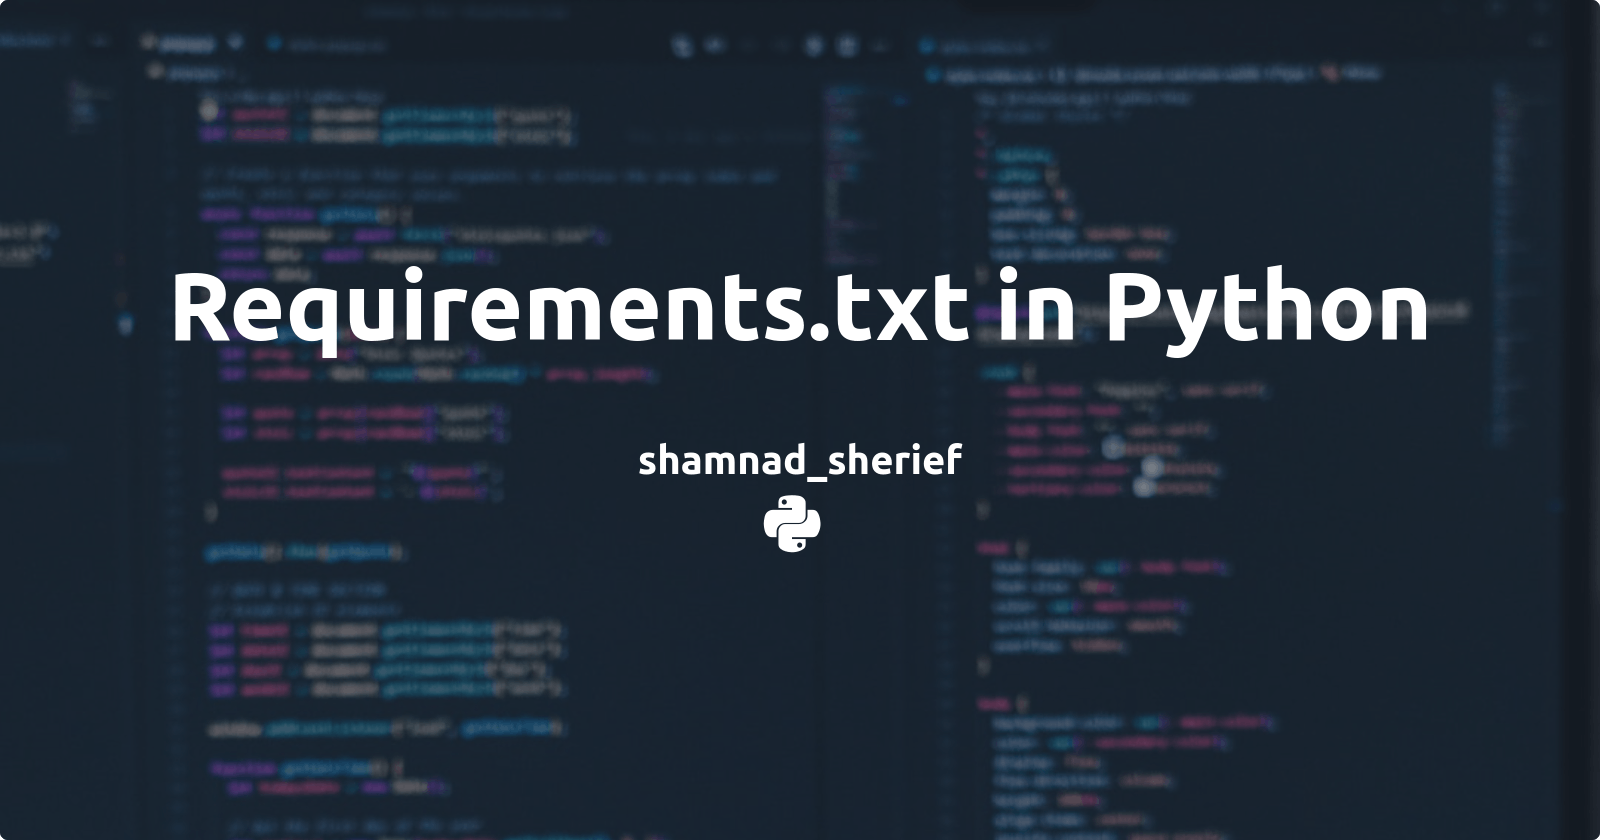 What is requirements.txt in Python?